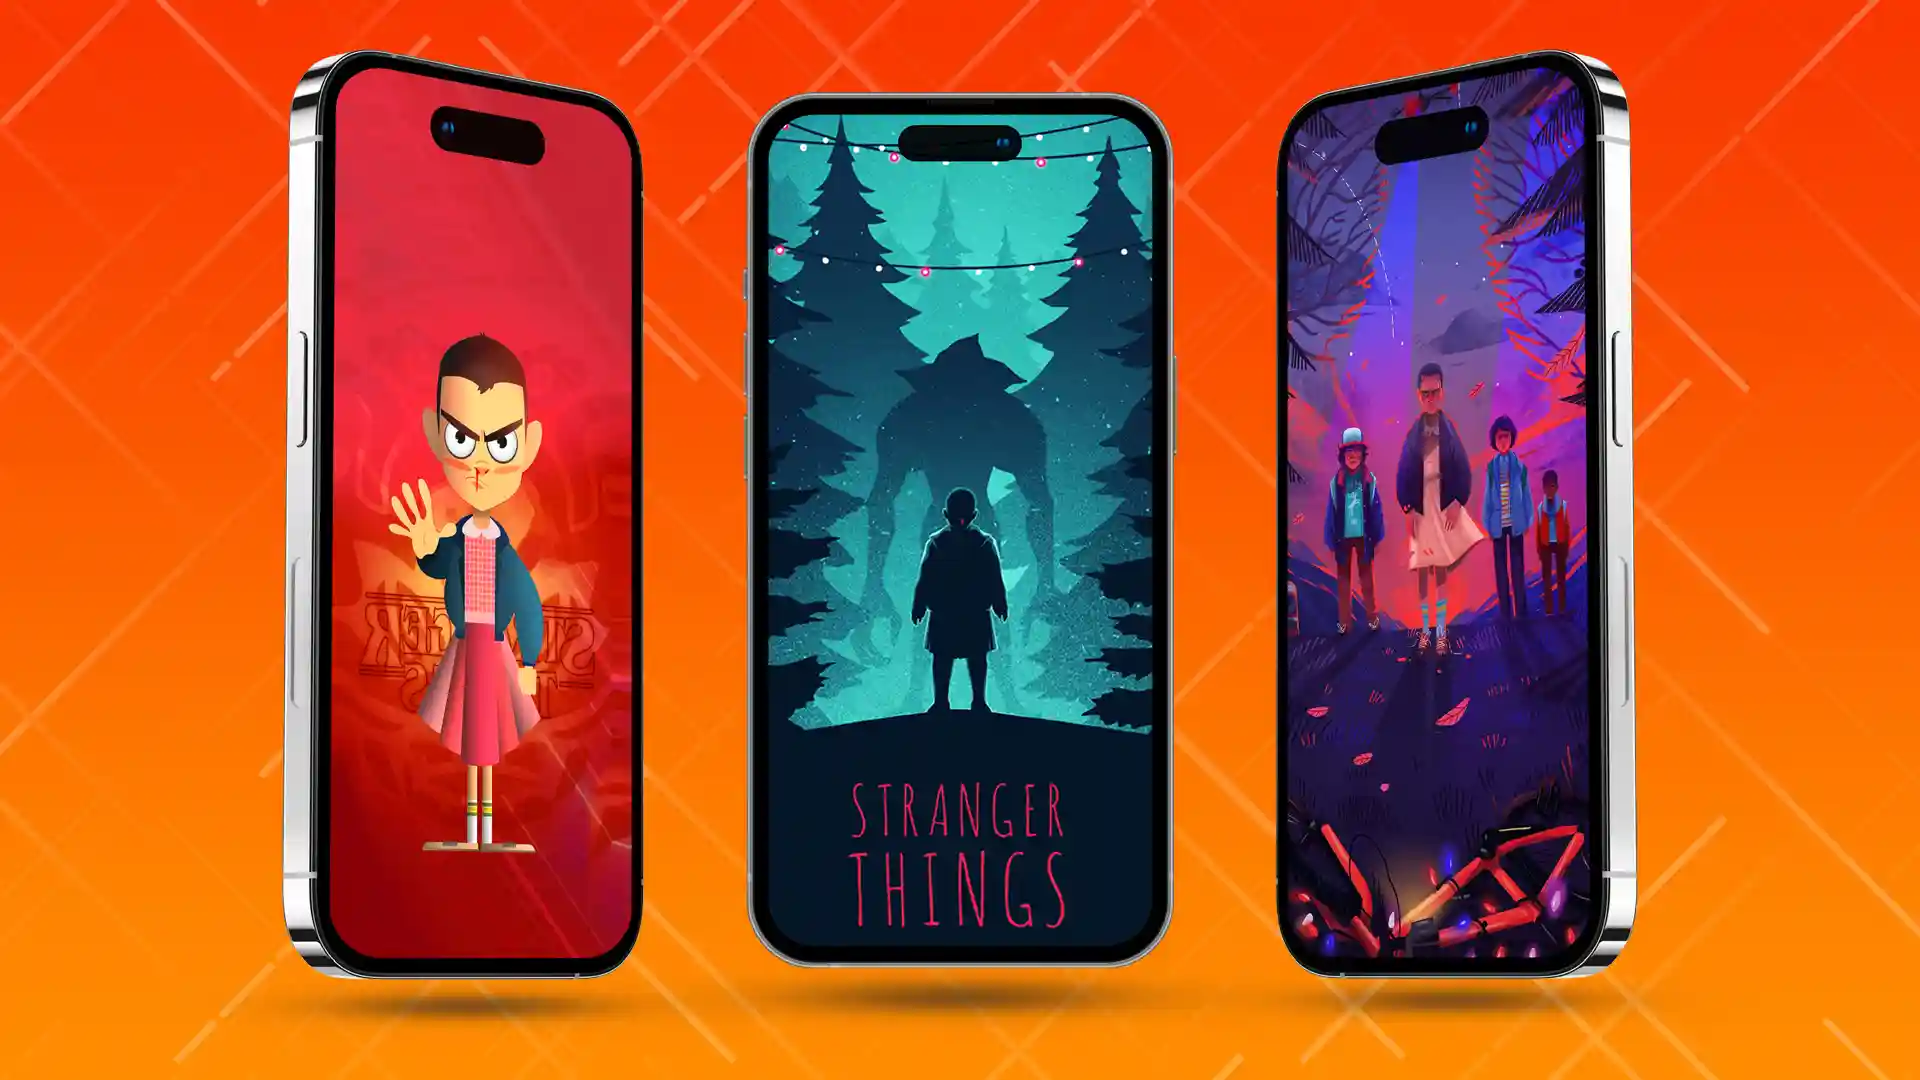 Stranger Things Season 3 Poster Characters 8K iPhone Wallpapers Free  Download